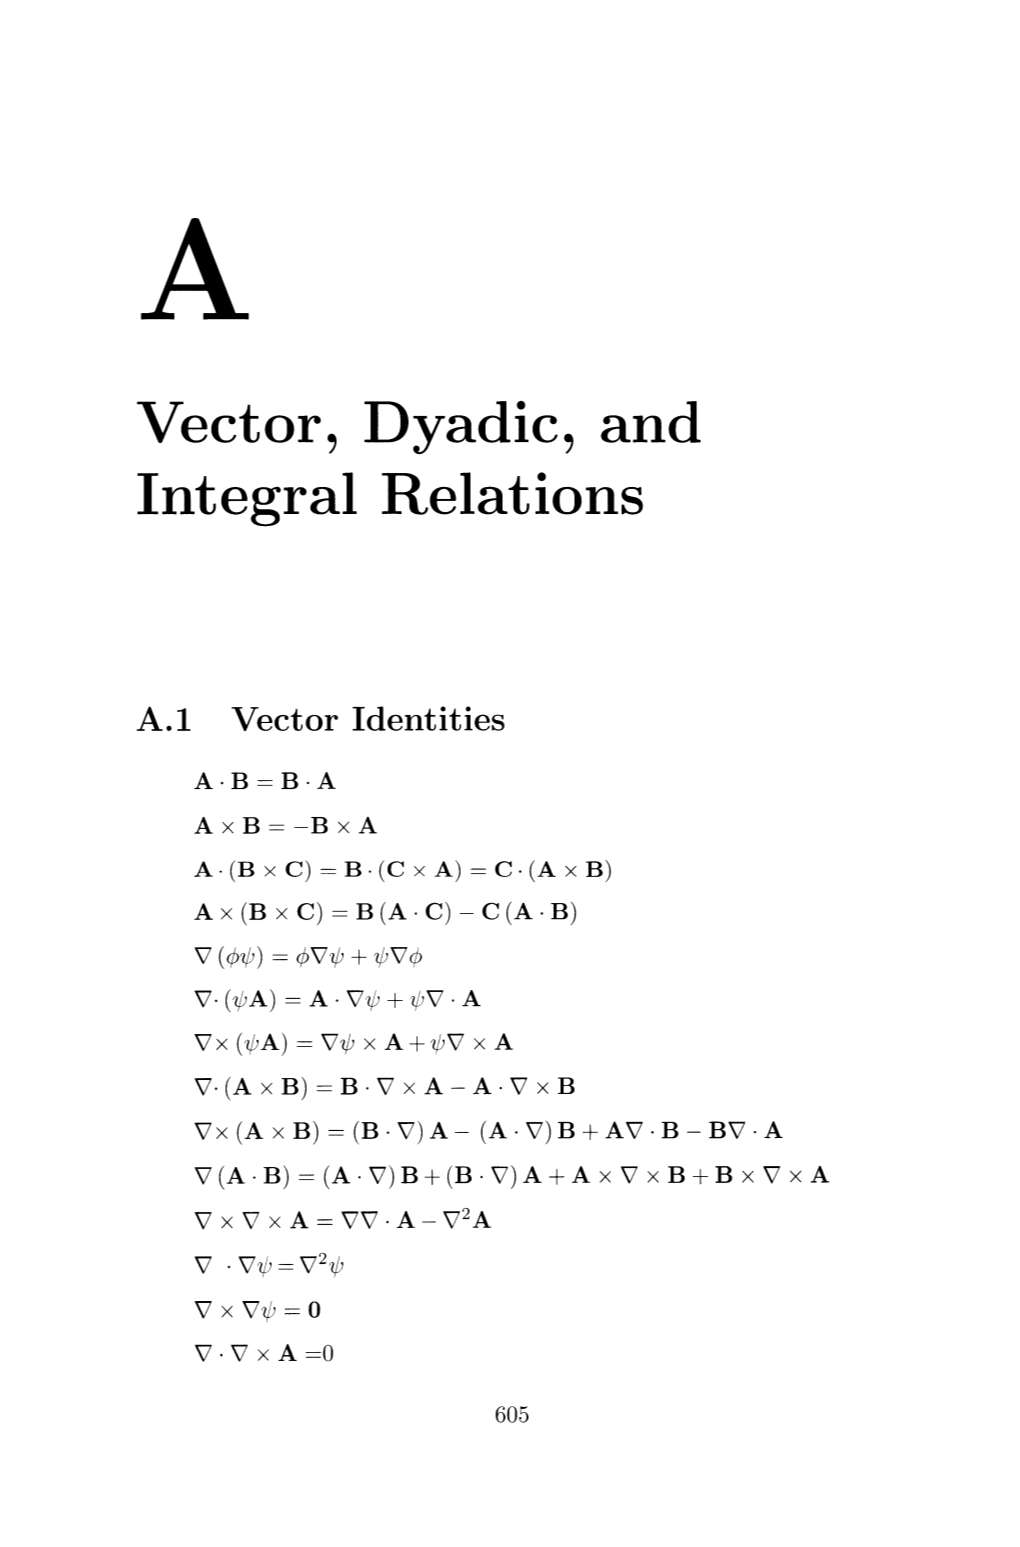 Vector, Dyadic, and Integral Relations